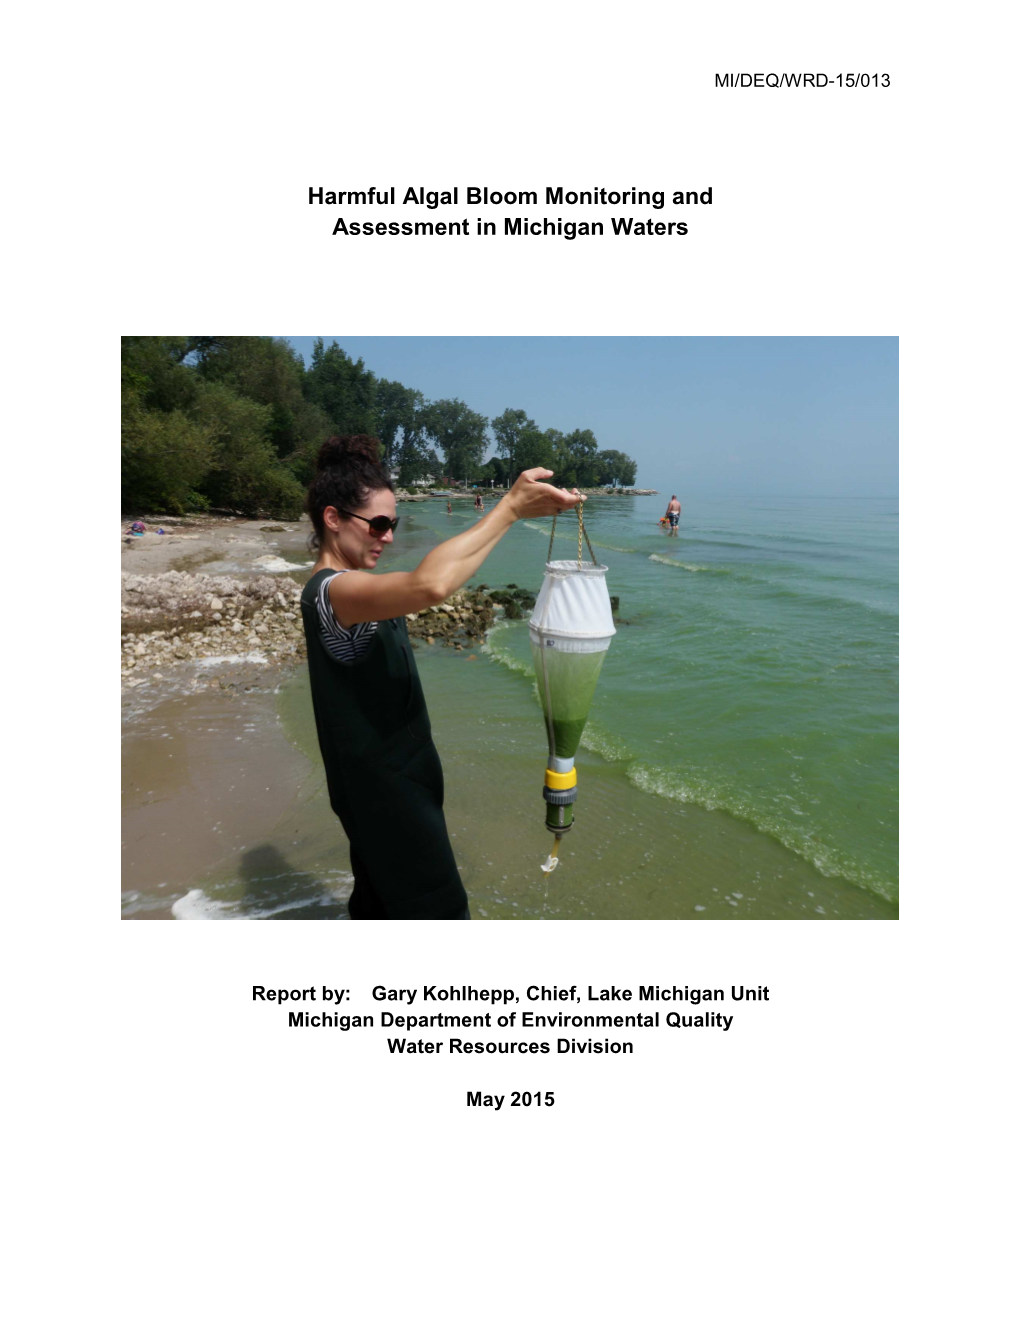 Harmful Algal Bloom Monitoring and Assessment in Michigan Waters